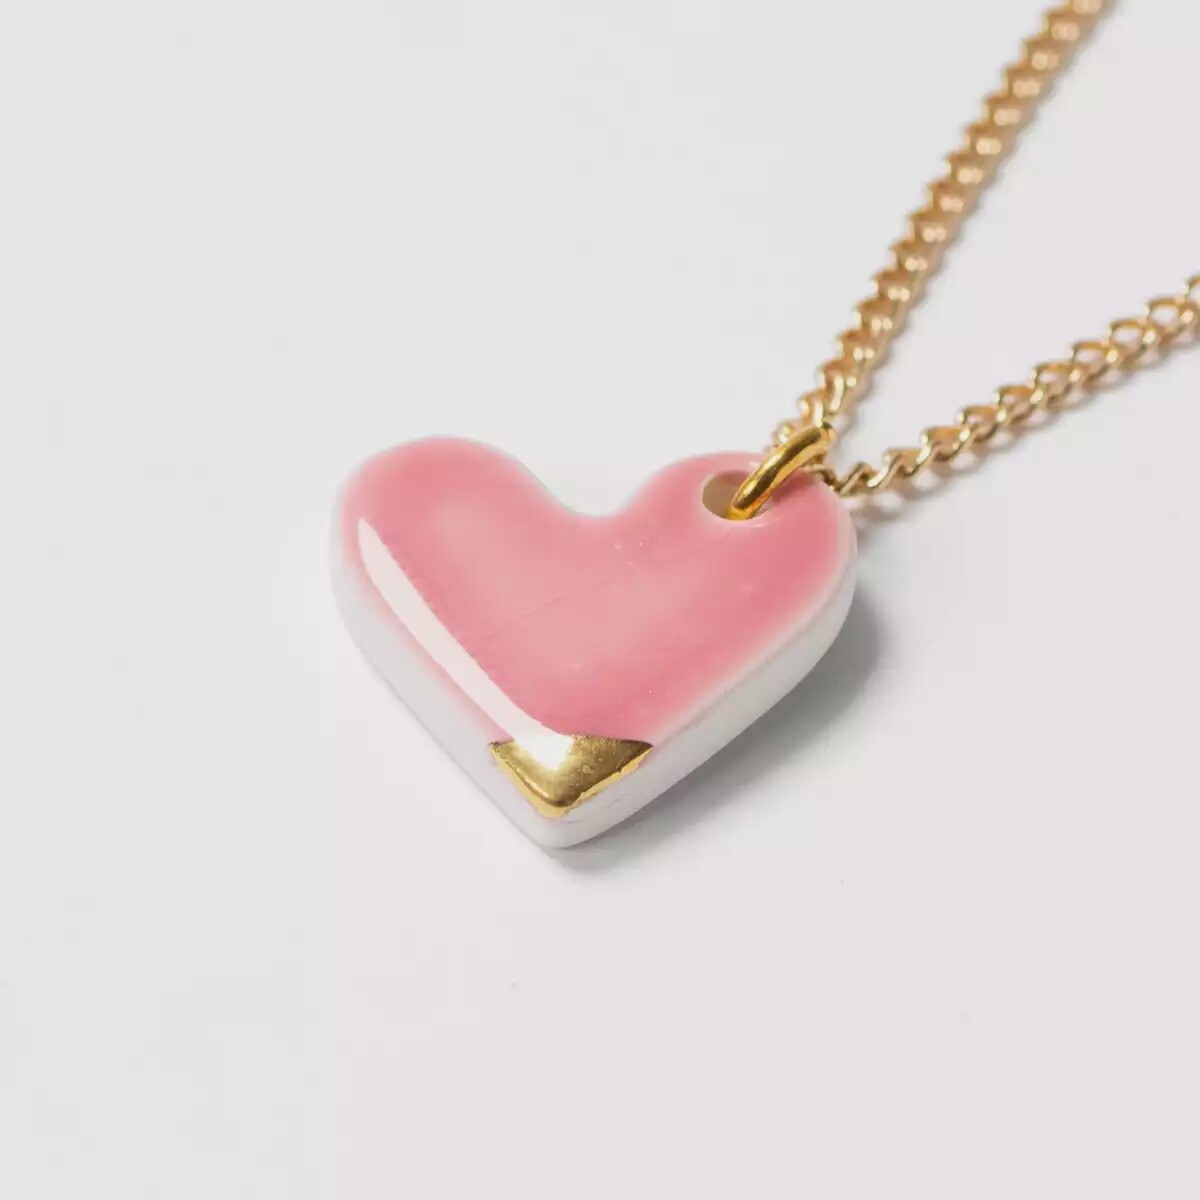 Ceramic Heart Necklace - Baby Pink by Clay Blanca